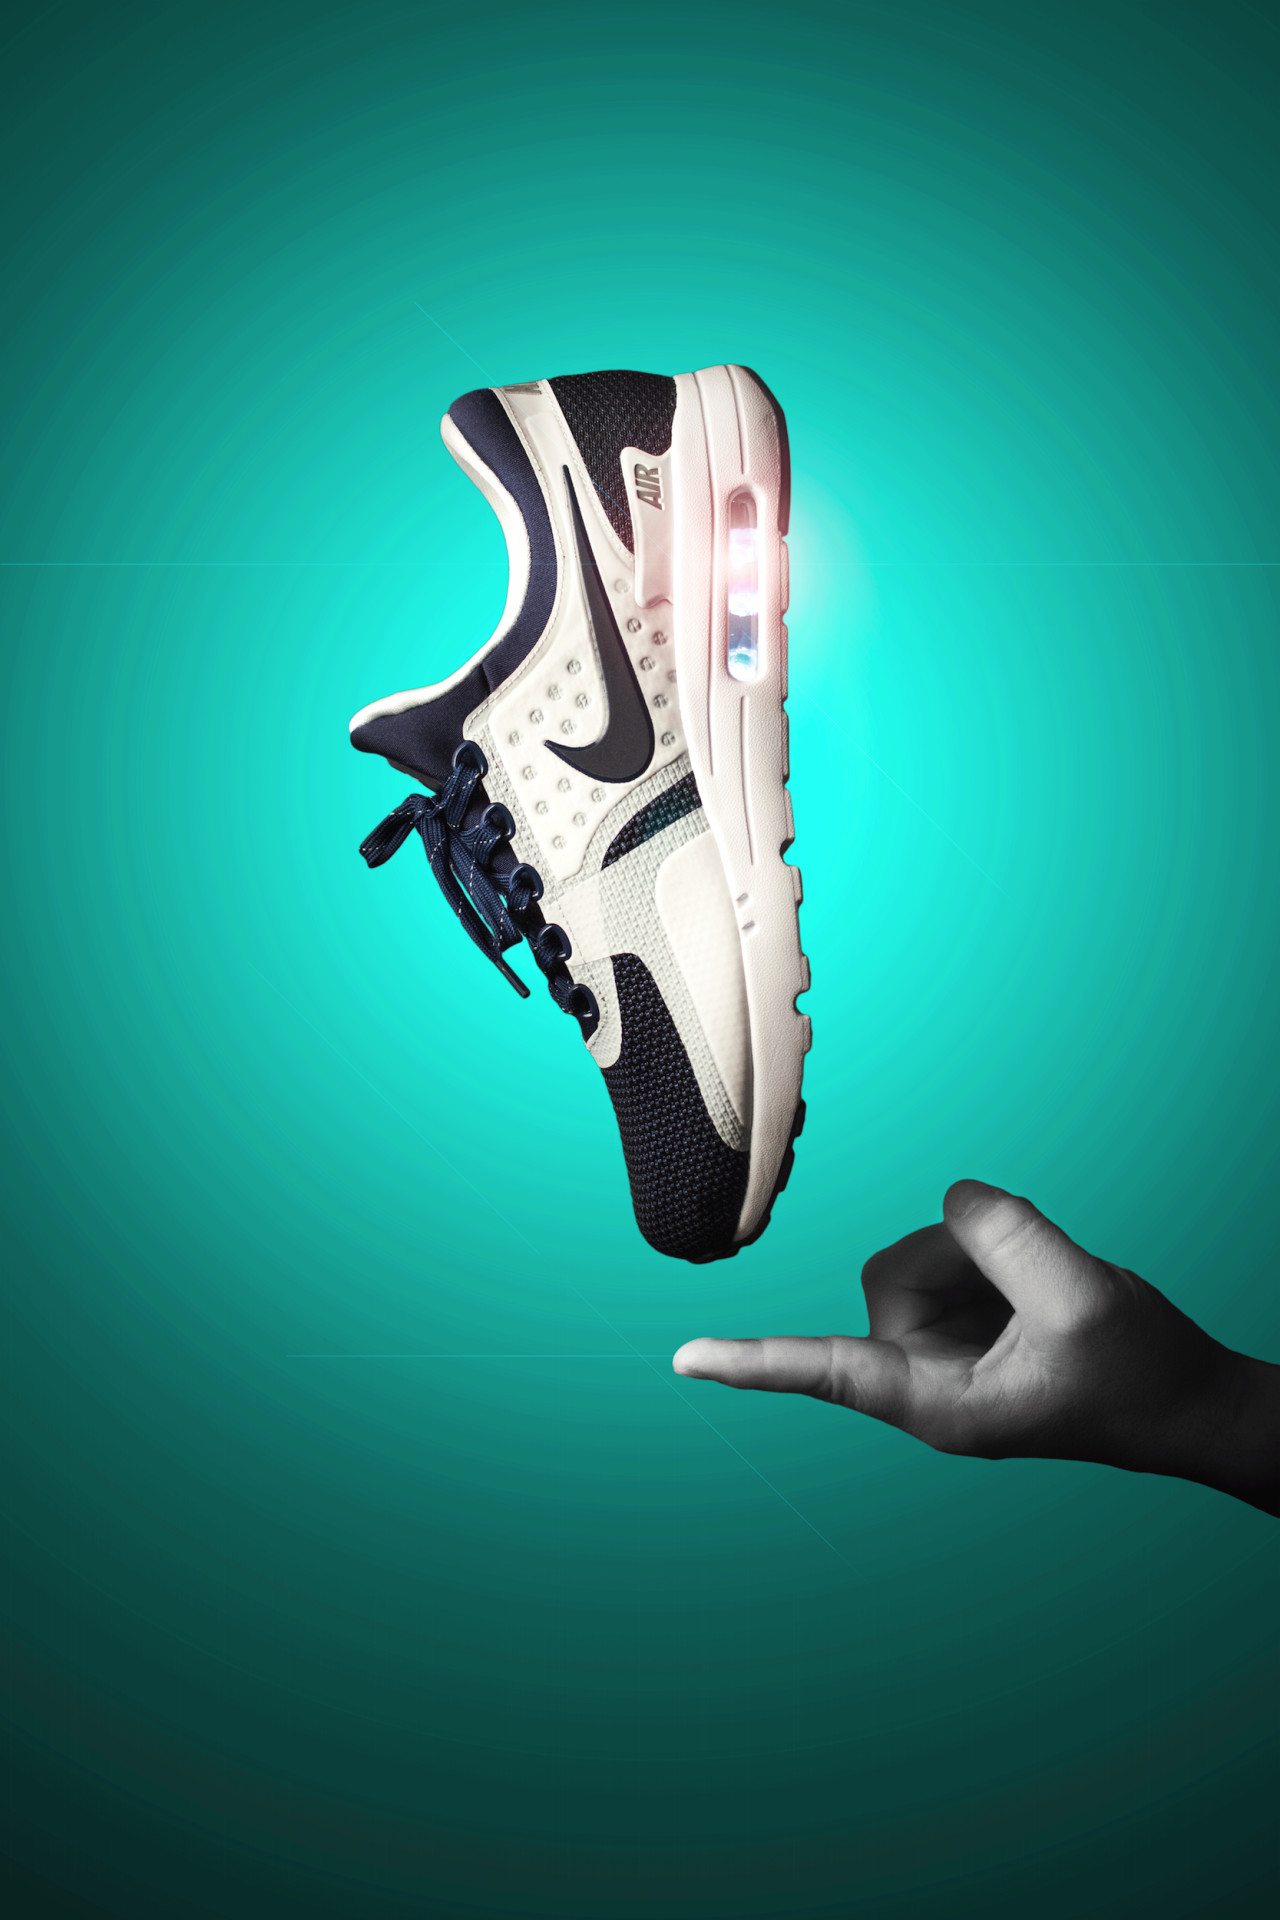 1280x1920 Vagrant Sneaker - Nike Air Max Zero wallpaper for your iPhone or.